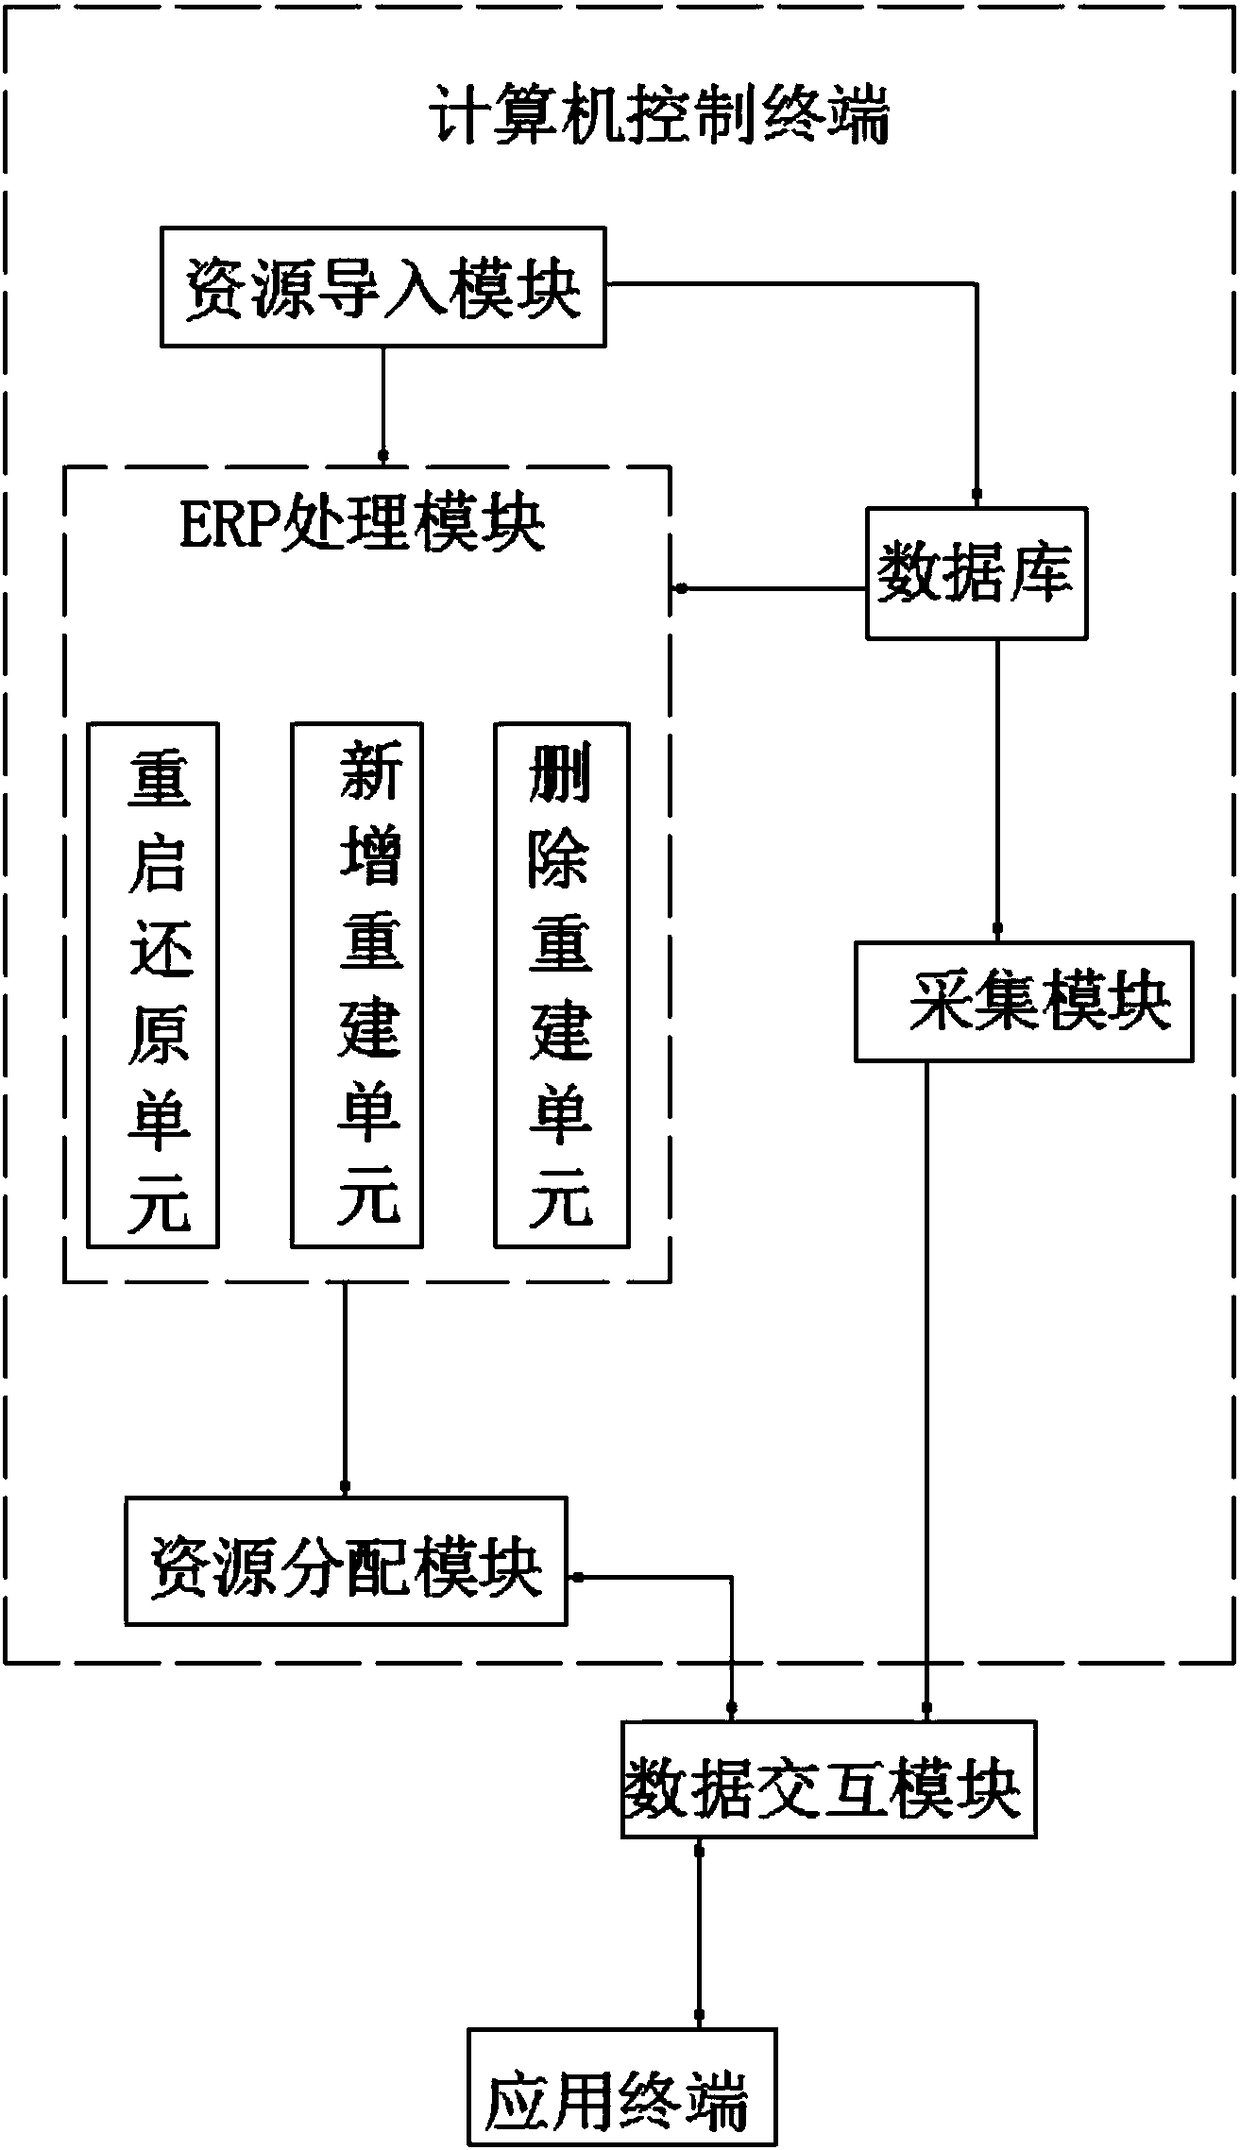 ERP-based computer operation maintenance device